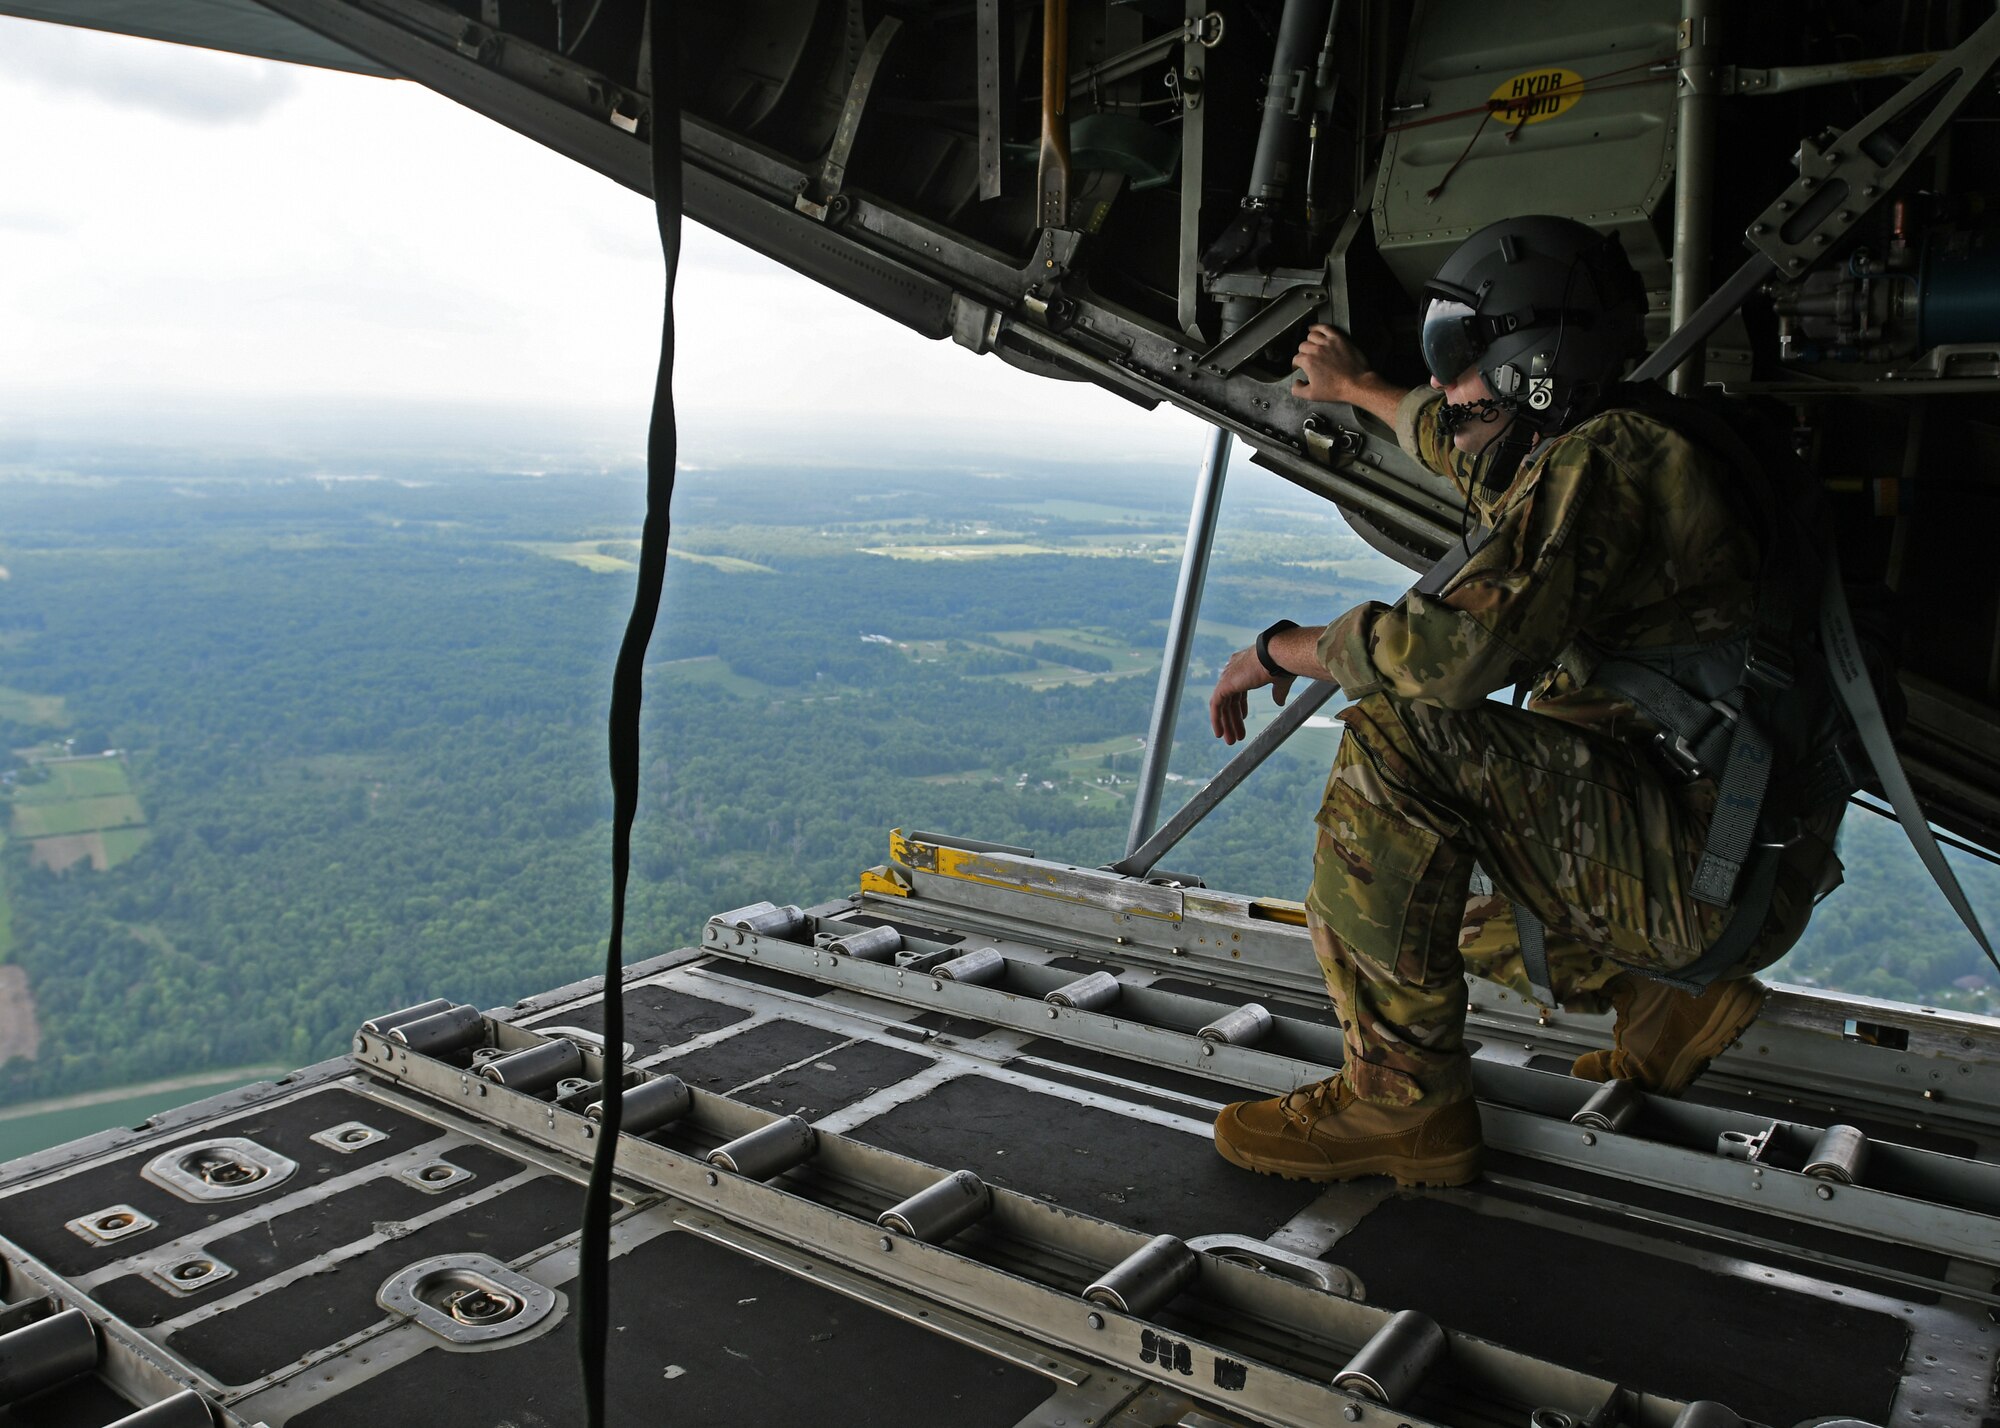 Staff Sgt. Jed Pickett, 700th Aerial Squadron loadmaster, stands on the open ramp of a C-130 Hercules as he simulates an airdrop at Youngstown Air Reserve Station, Ohio, Aug. 10, 2018. Loadmasters are responsible for physically pushing the drops out of the aircraft, as the rest of the crew navigates and directs when to drop. (U.S. Air Force photo by Staff Sgt. Miles Wilson)